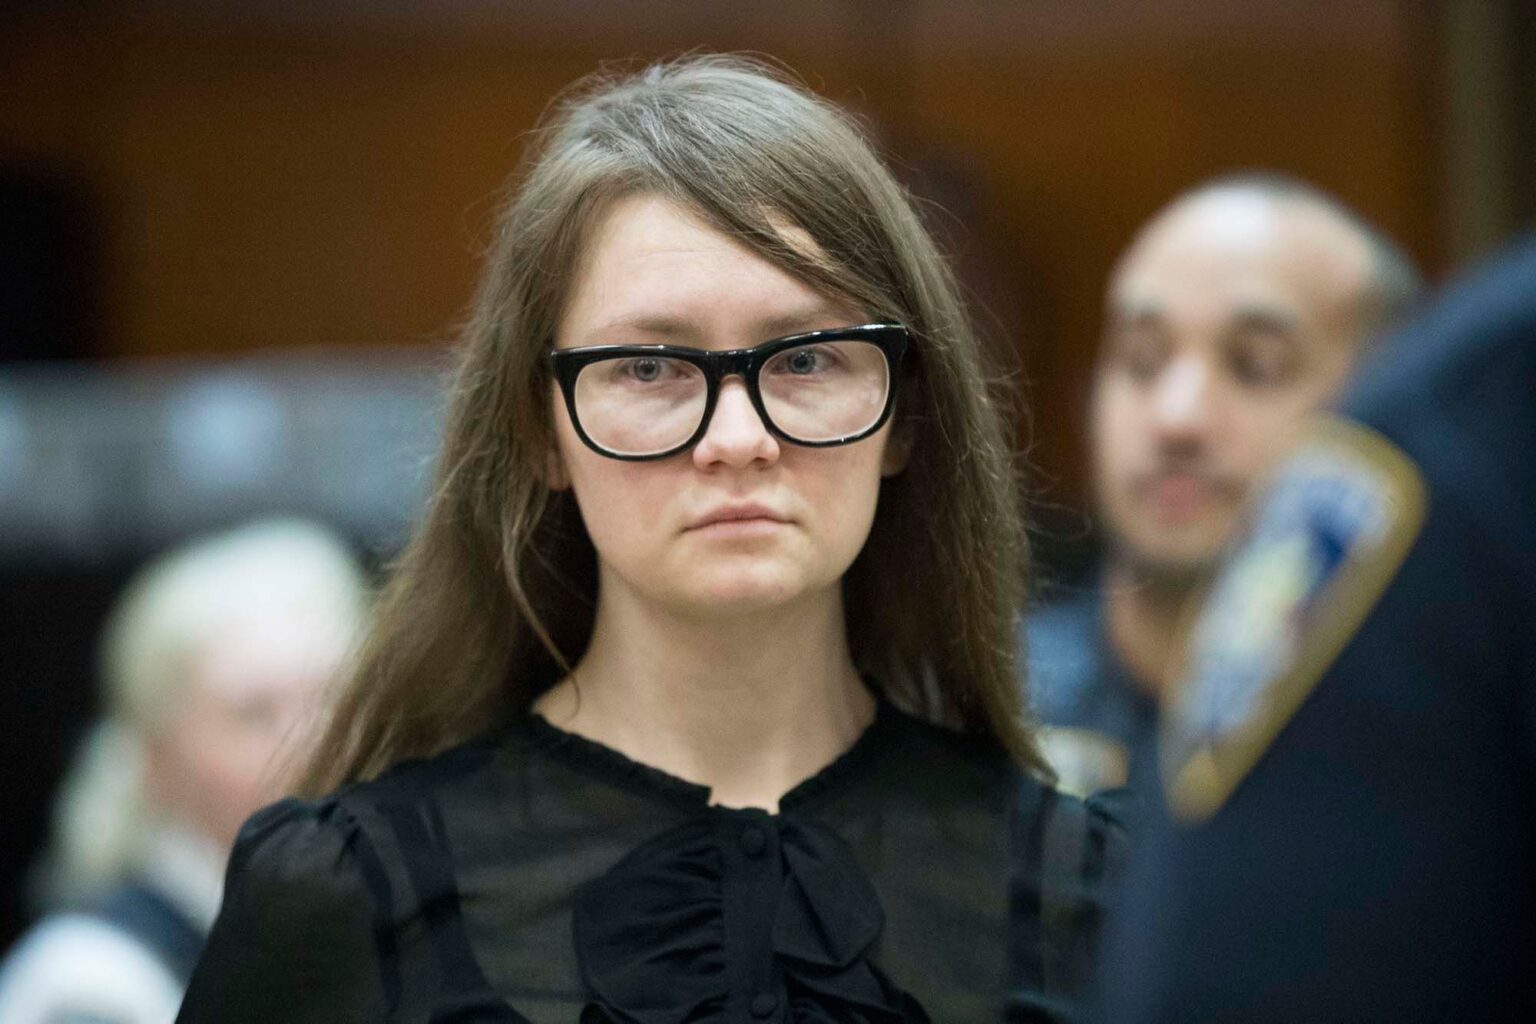 Anna Sorokin, the woman who was labeled the “Soho grifter”, was recently released from a New York prison. Is she returning to her old ways?